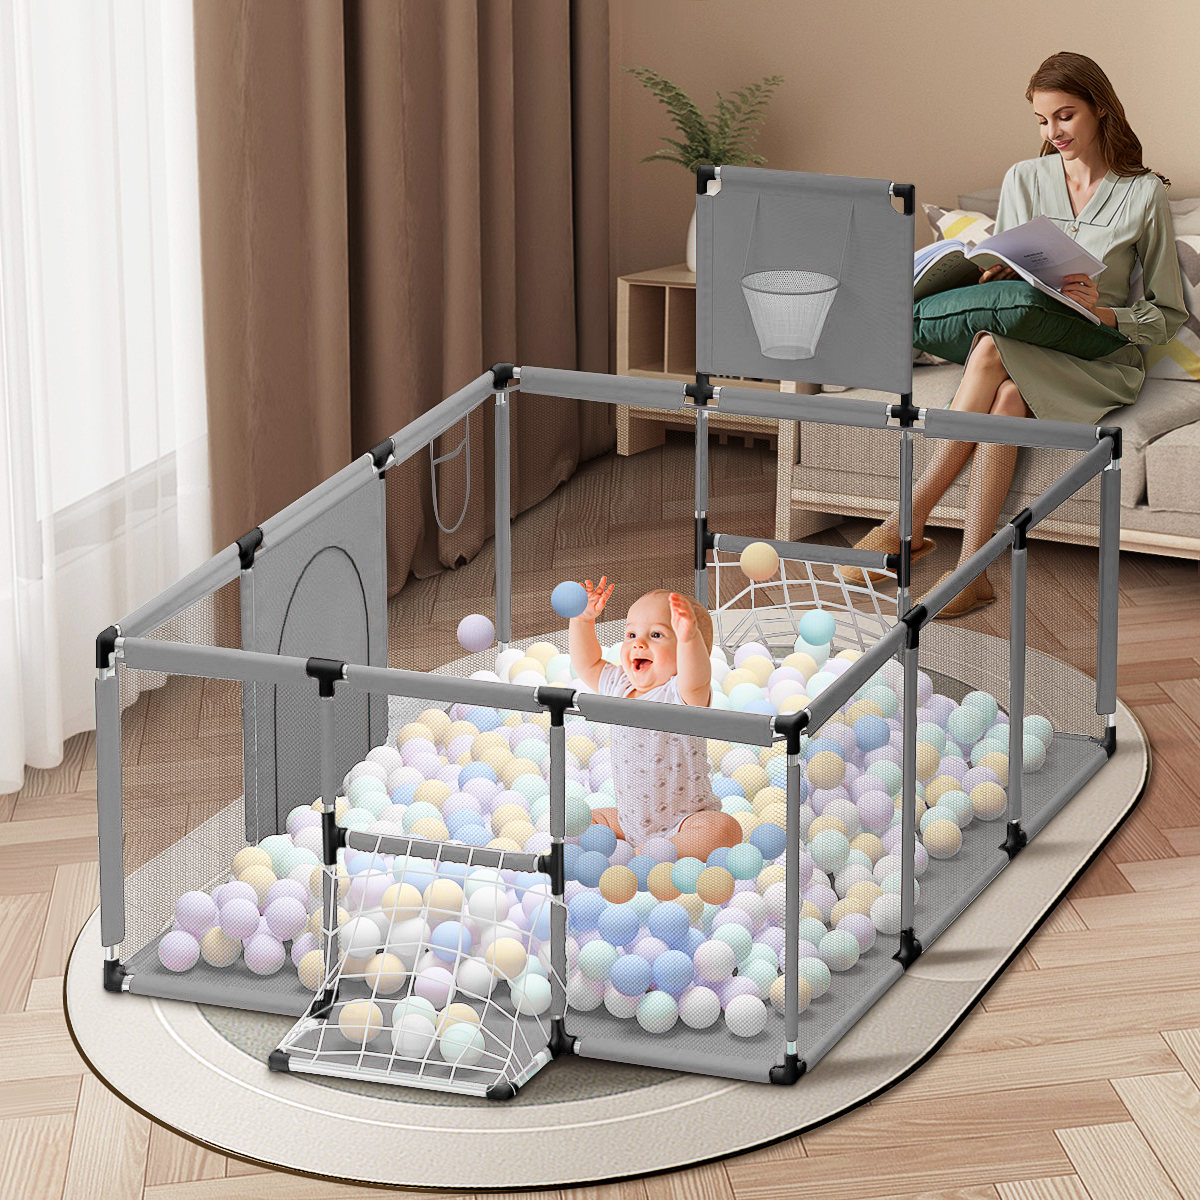 Baby-Playpen-Oxford-Cloth-Children-Infant-Fence-Safety-Barriers-Children-Ball-Pool-Baby-Playground-G-1935212-6